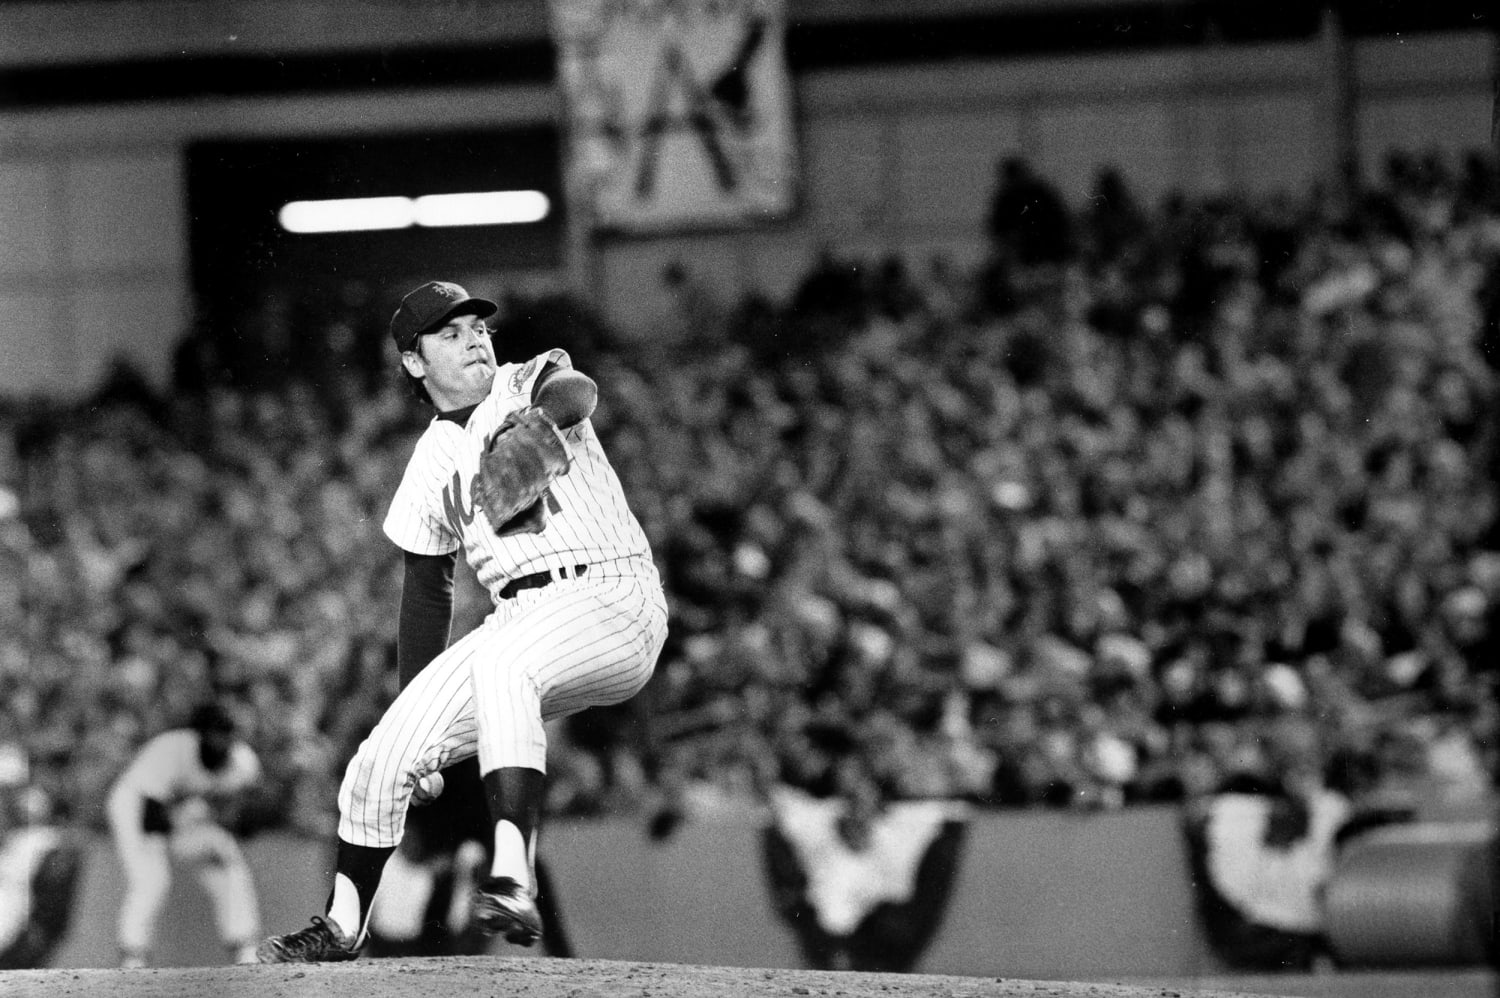 Hall of Fame pitcher Tom Seaver diagnosed with dementia at 74